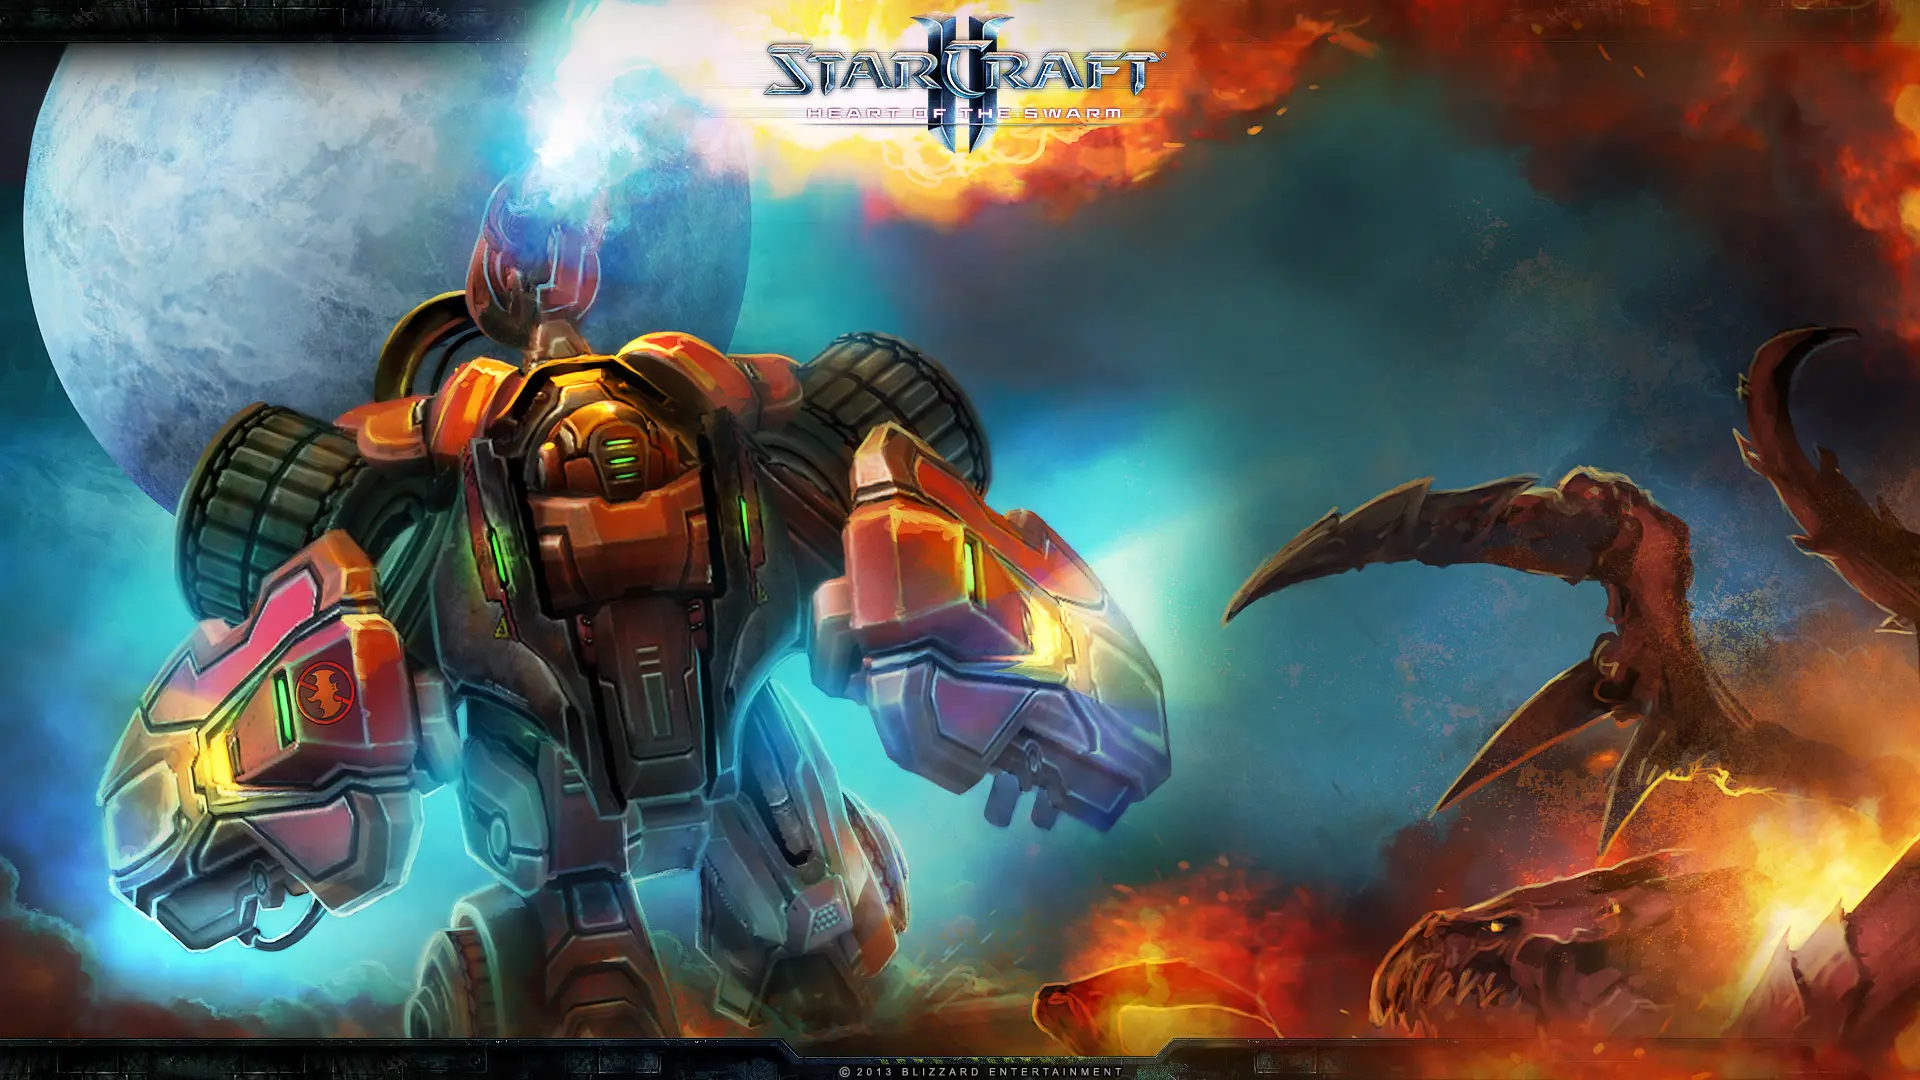 Game Starcraft 2 Heart of the Swarm wallpaper 19 | Background Image